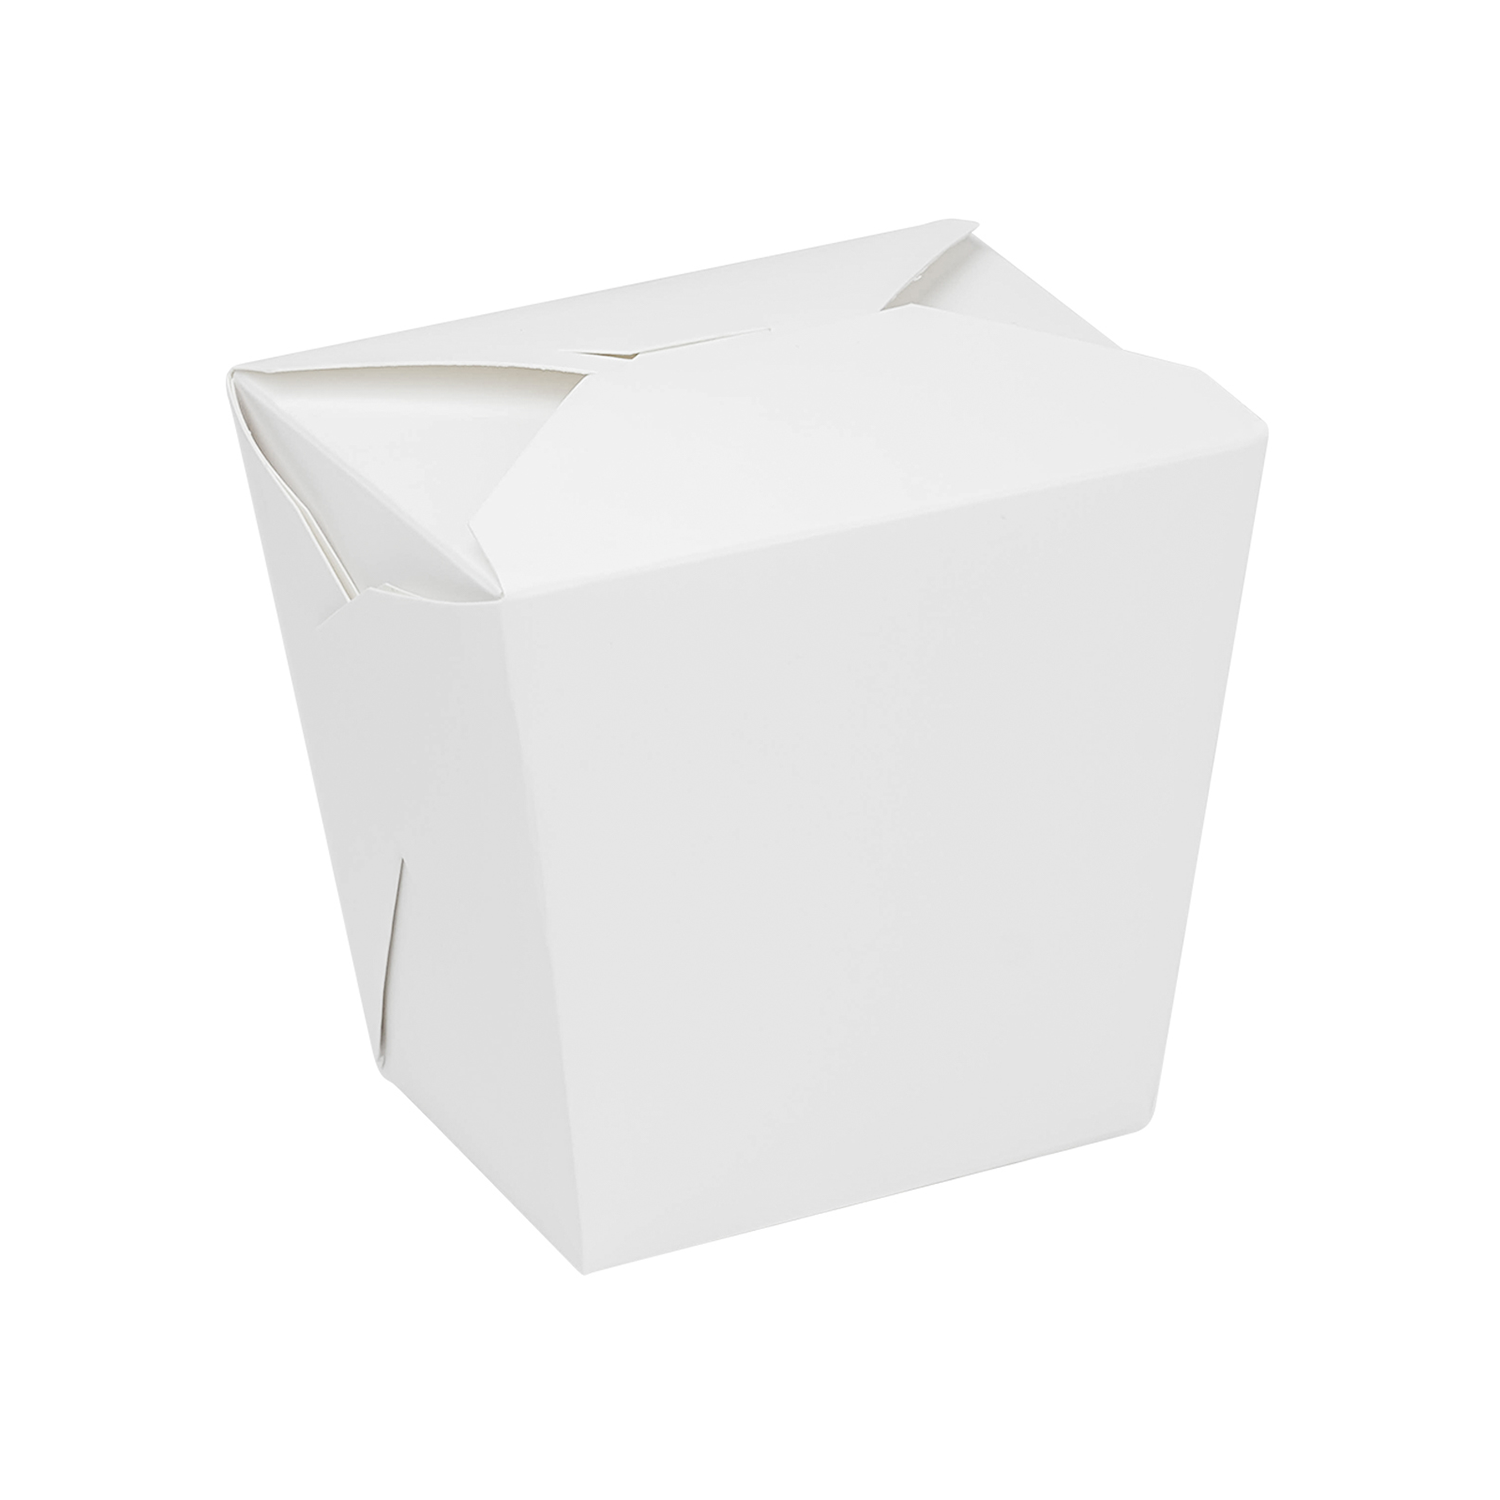 [50 Pack] Chinese Take Out Boxes - 32 oz Plain White Chinese Food  Containers for To Go Asian Meals - Chinese Food Boxes for Noodles, Rice -  Takeout